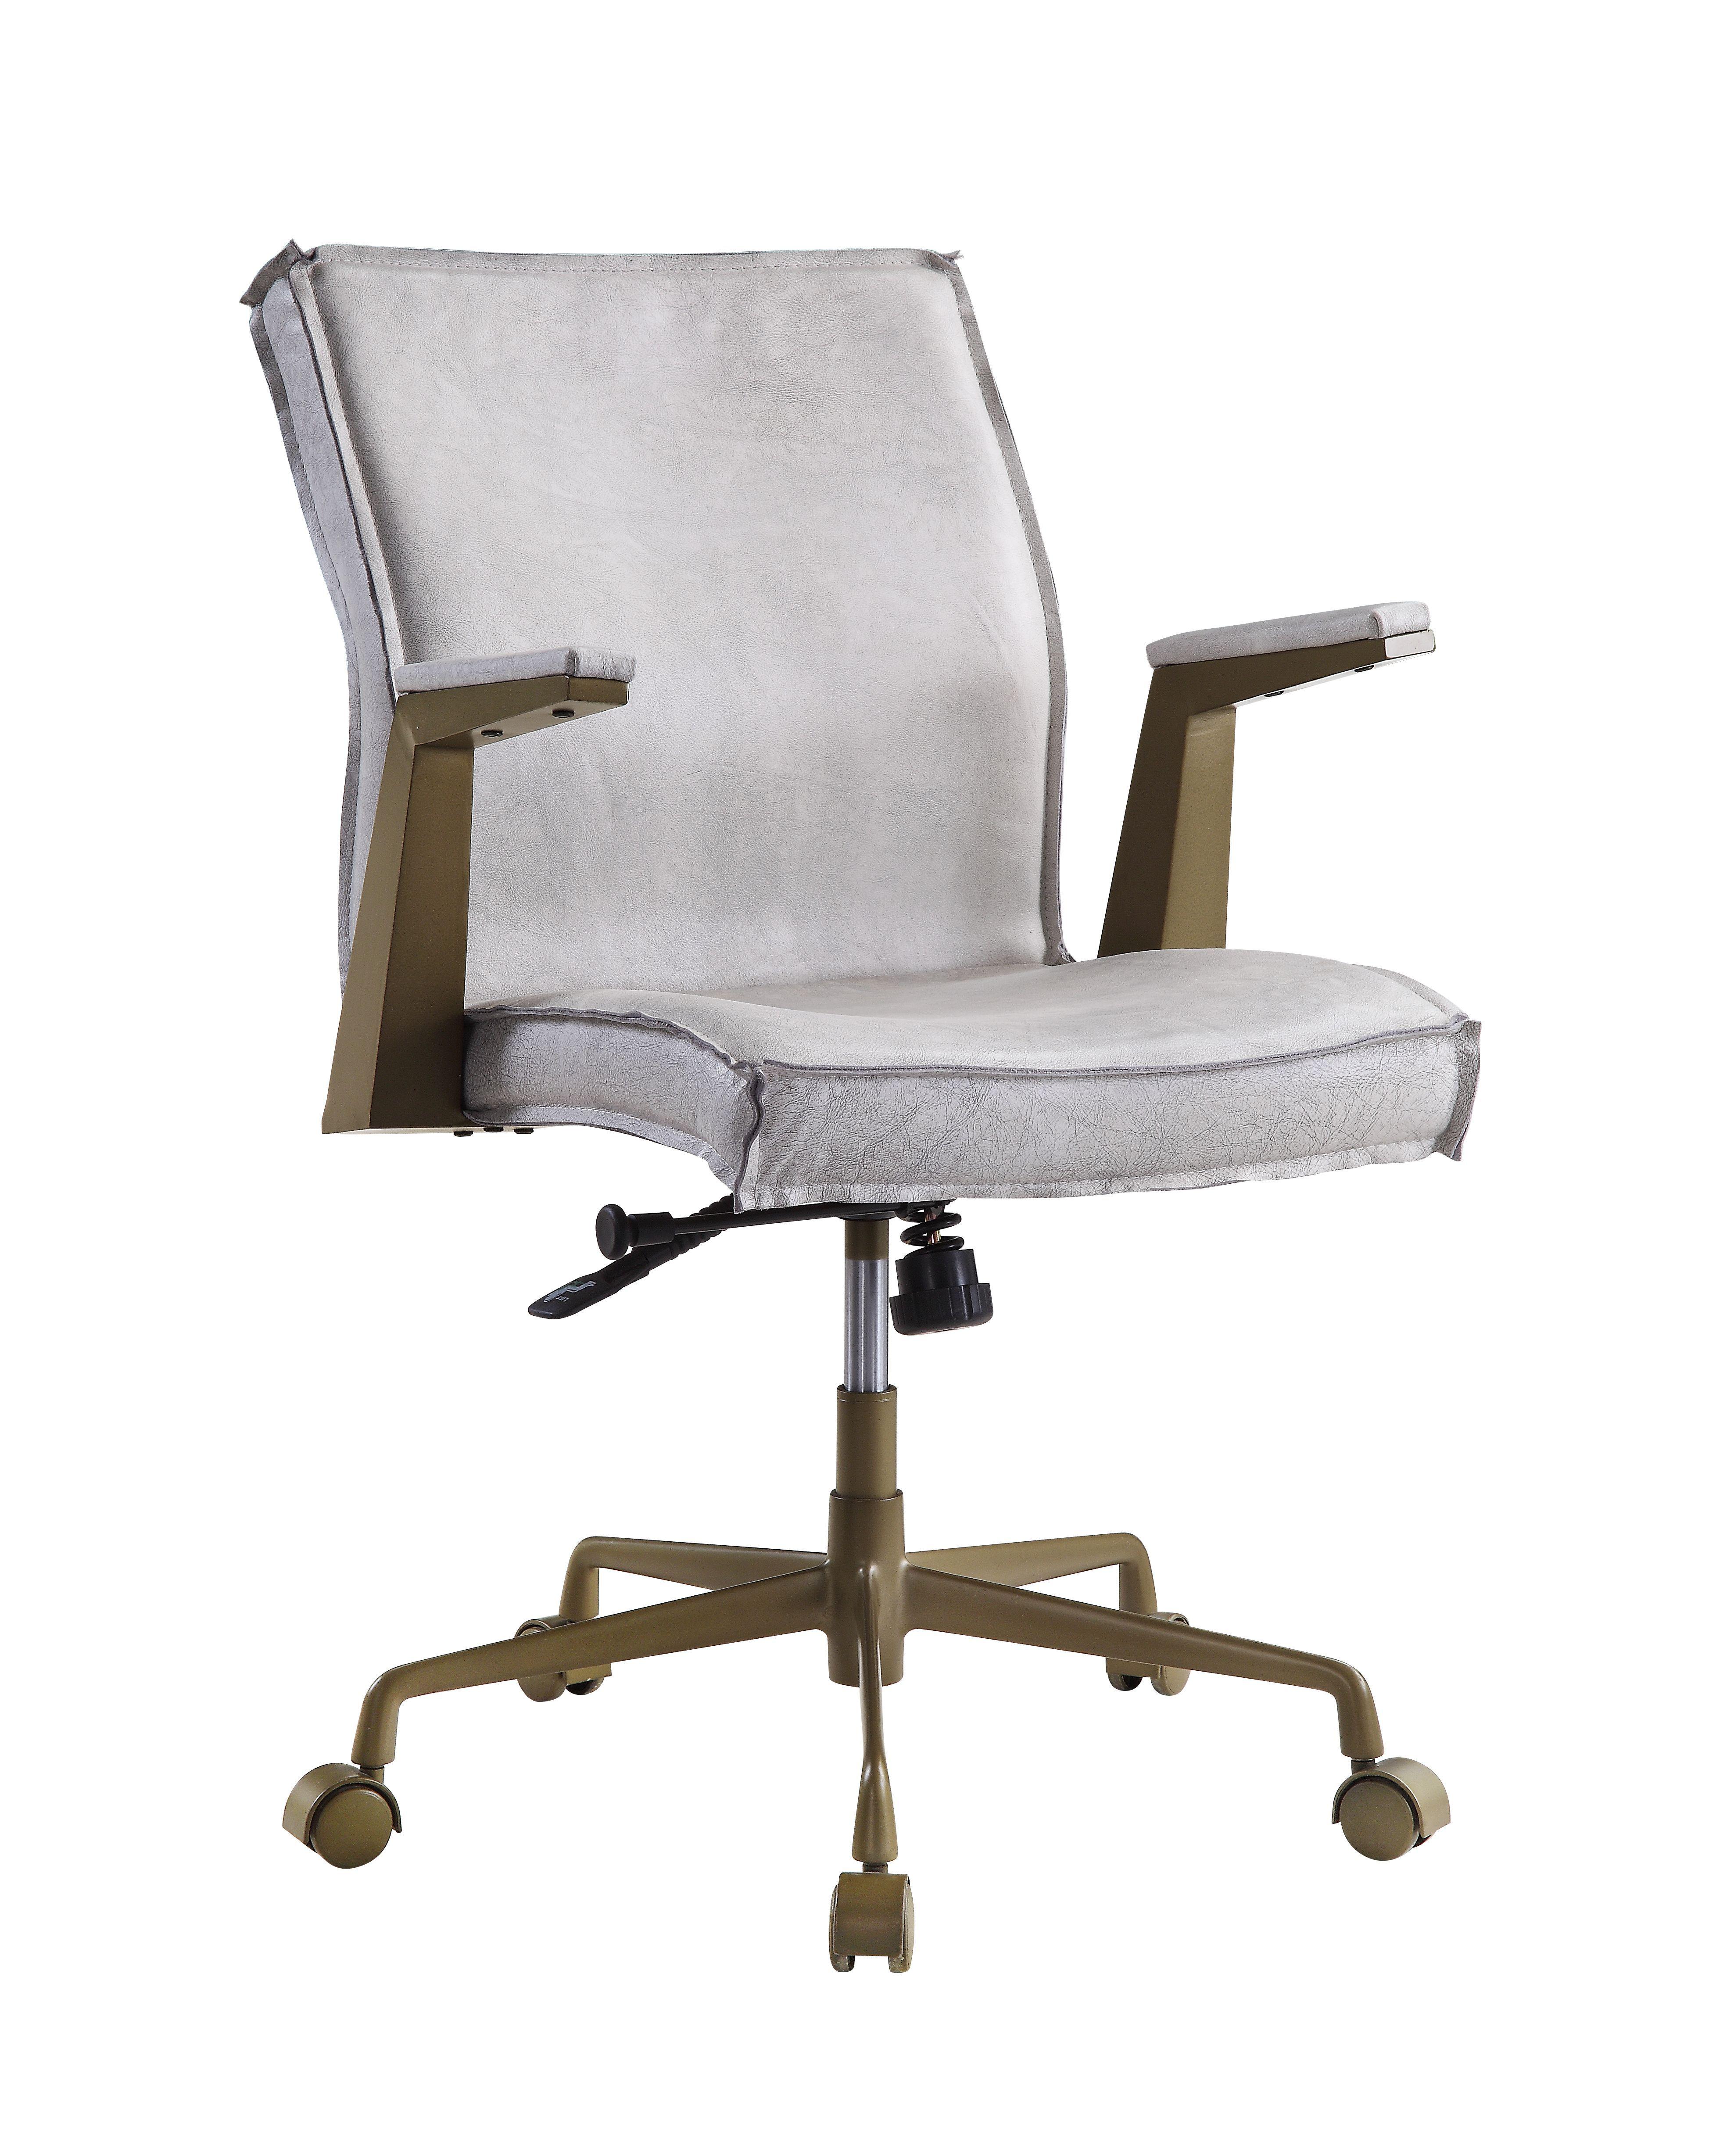 Contemporary,  Vintage Executive Office Chair Attica 92484 in Vintage White Top grain leather